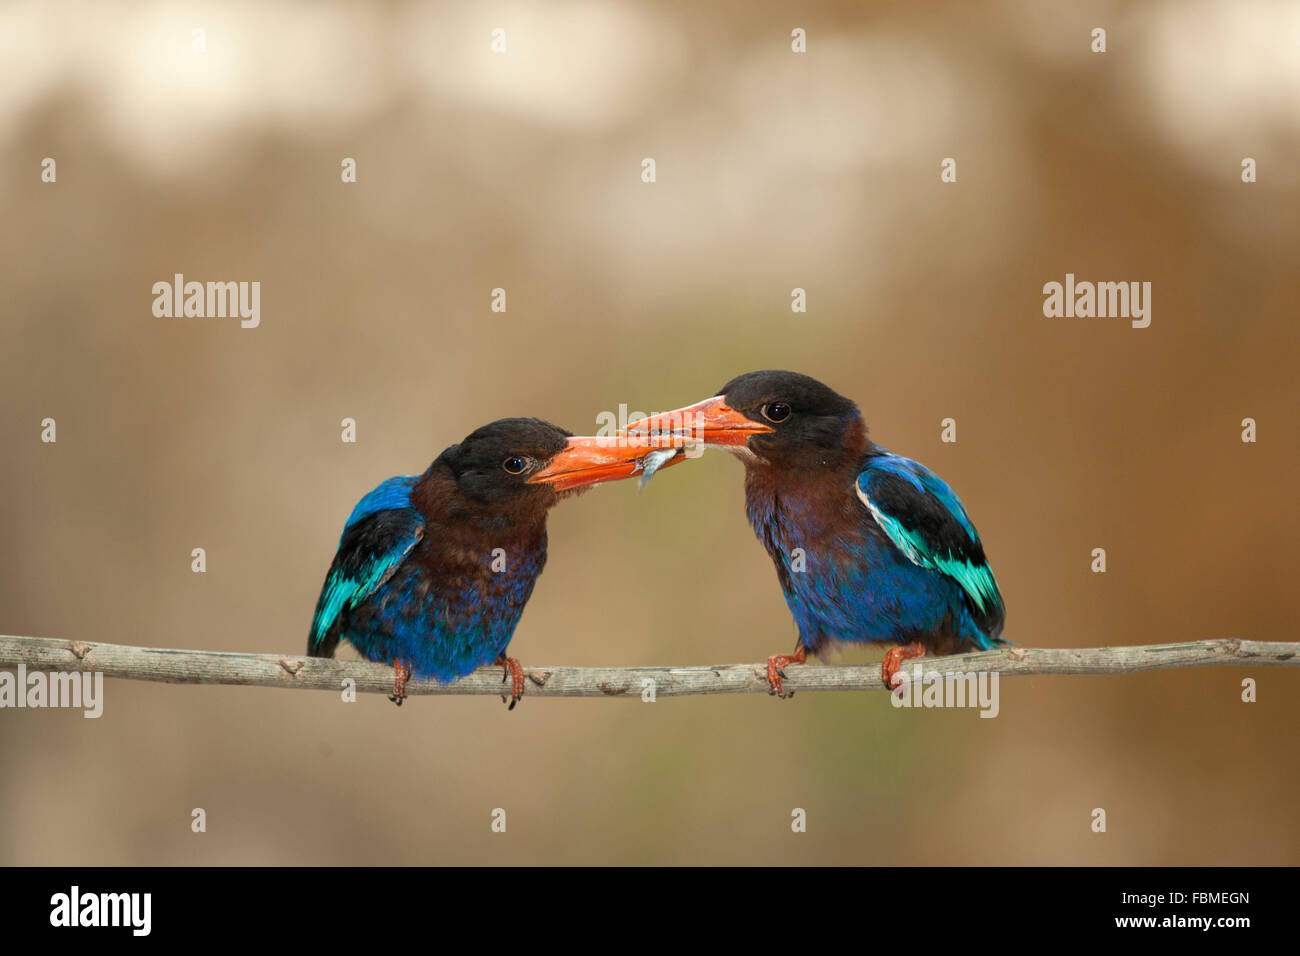 Two kingfisher birds passing a fish in beak, Jember, East Java, Indonesia Stock Photo